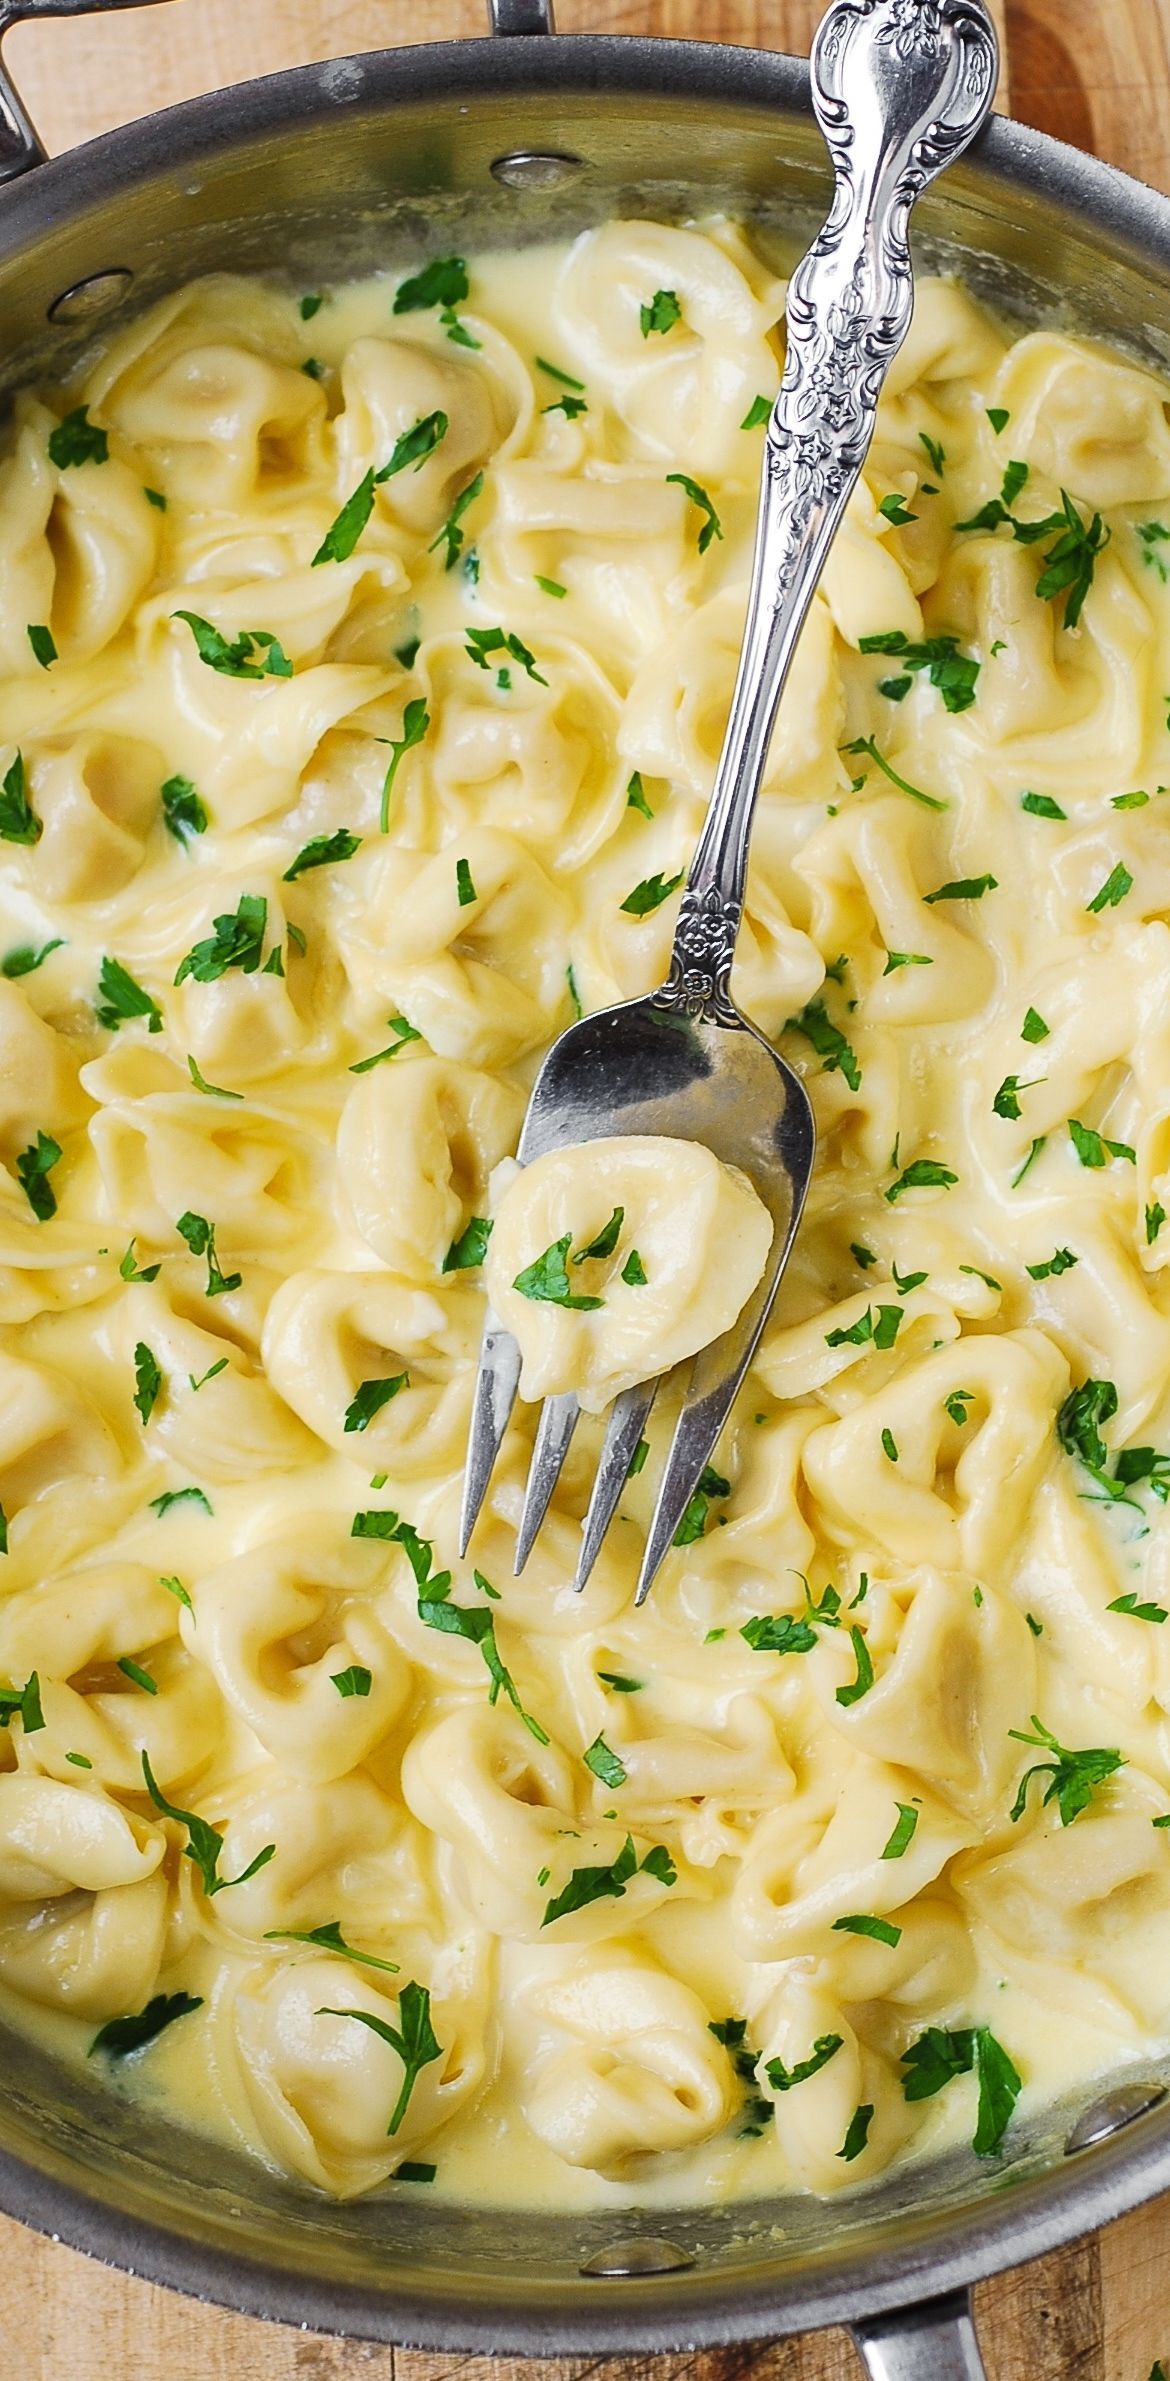 Delicious Tortellini smothered in a Creamy Asiago Cheese Garlic Sauce – easy, 30-m